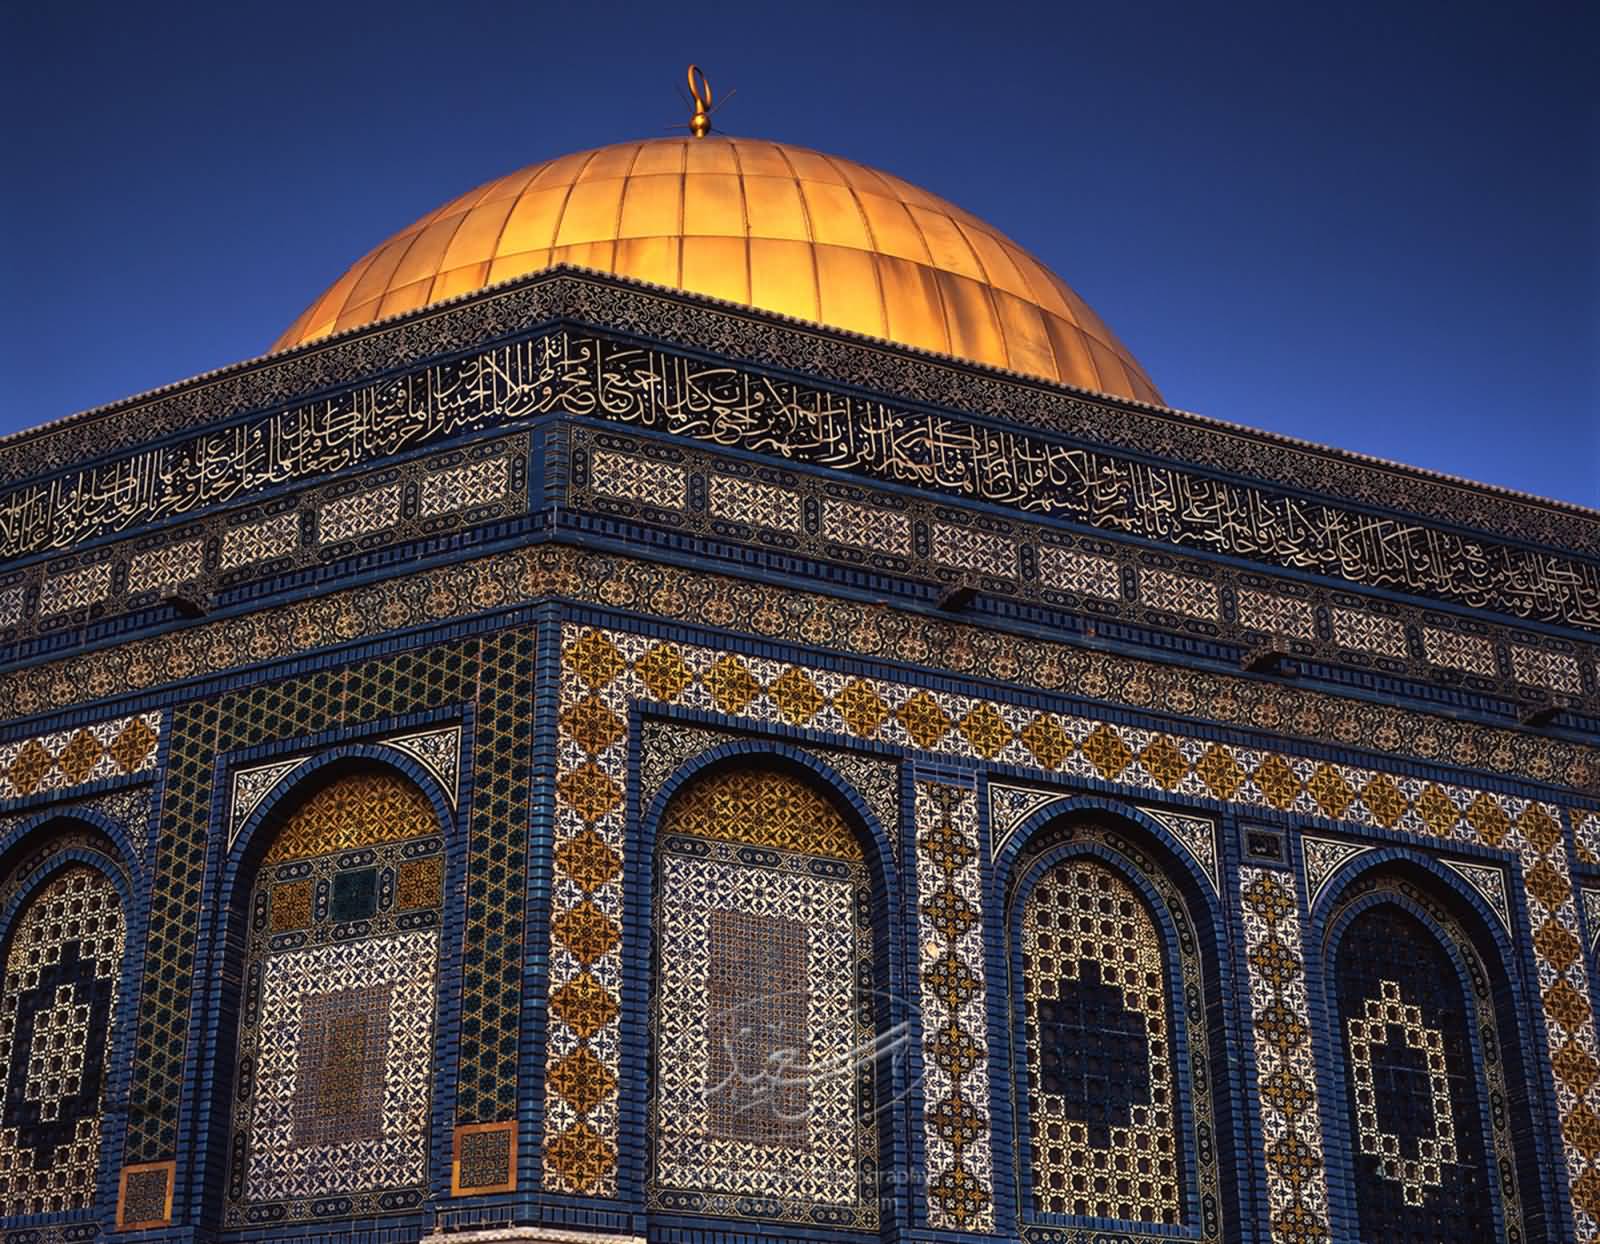 Amazing Architecture On The Walls Of The Dome Of The Rock